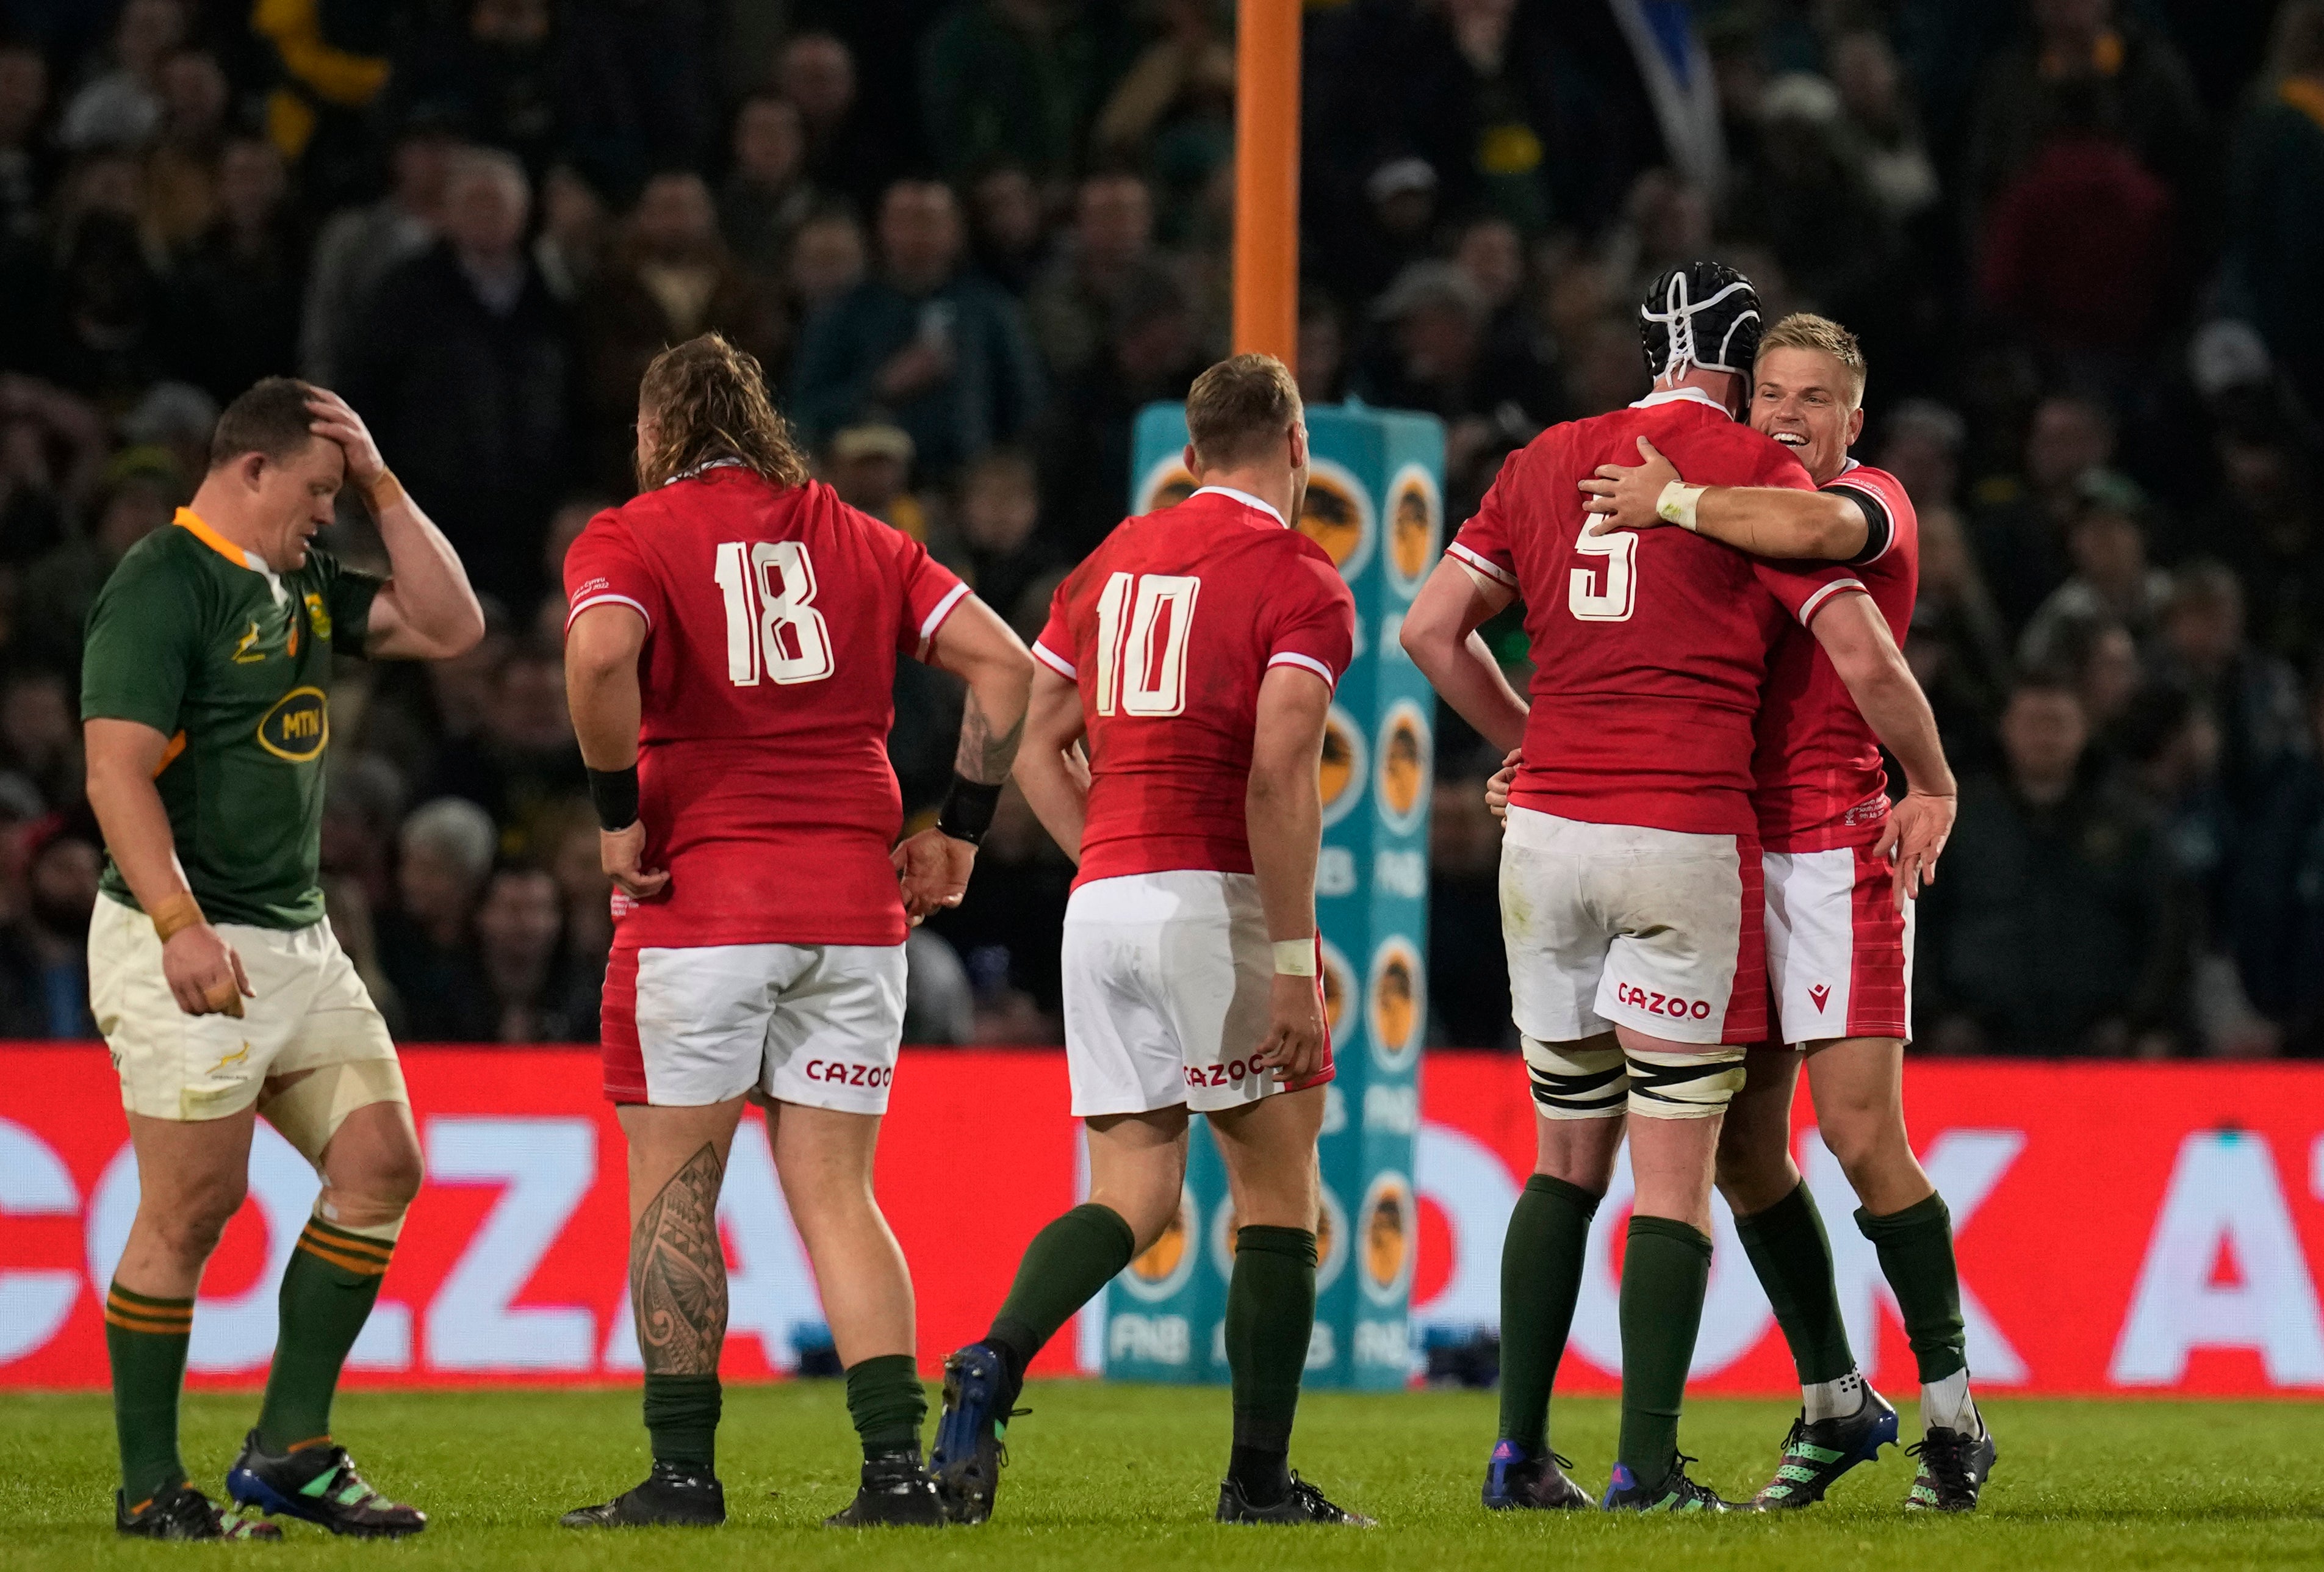 Gareth Anscombe (far right) kicked a last-gasp conversion as Wales beat South Africa 13-12 in Bloemfontein to set up a series decider next week (Themba Hadebe/AP)